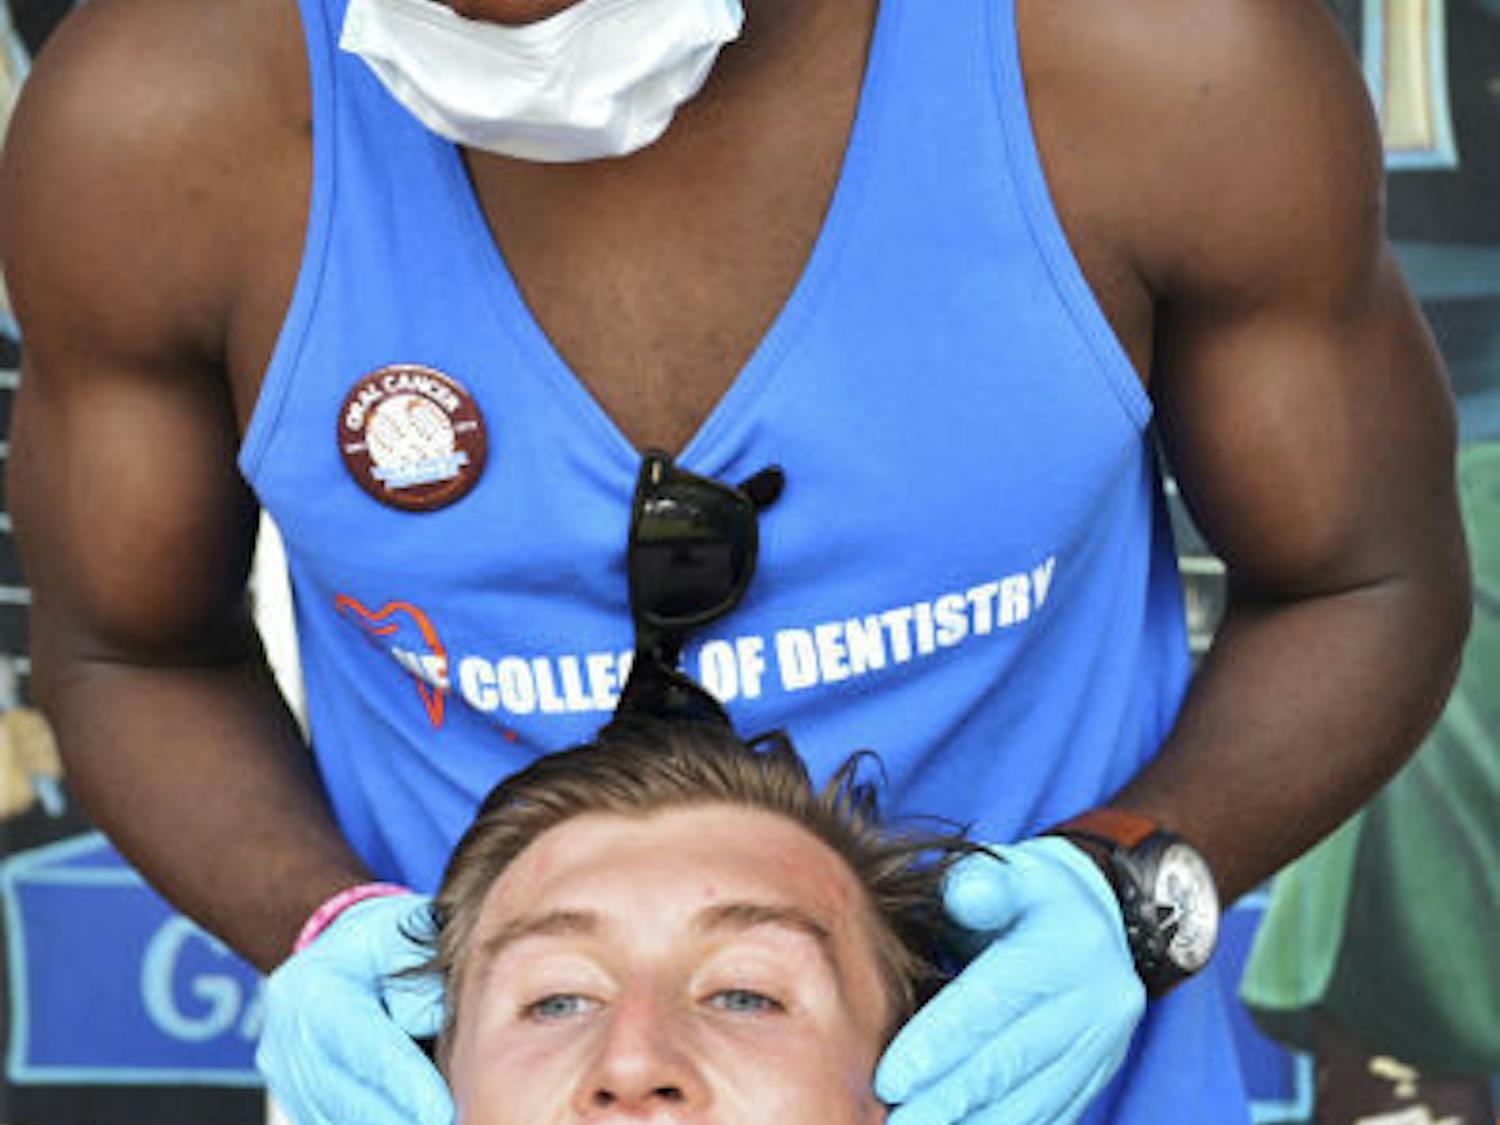 Patrick Lolo, a senior UF dental student, checks the mouth of Derek Bolser, a junior UF natural resource conservation major, during the 2nd Annual Oral Cancer Foundation 5K Run/Walk for Awareness on Bo Diddly Plaza on Saturday.